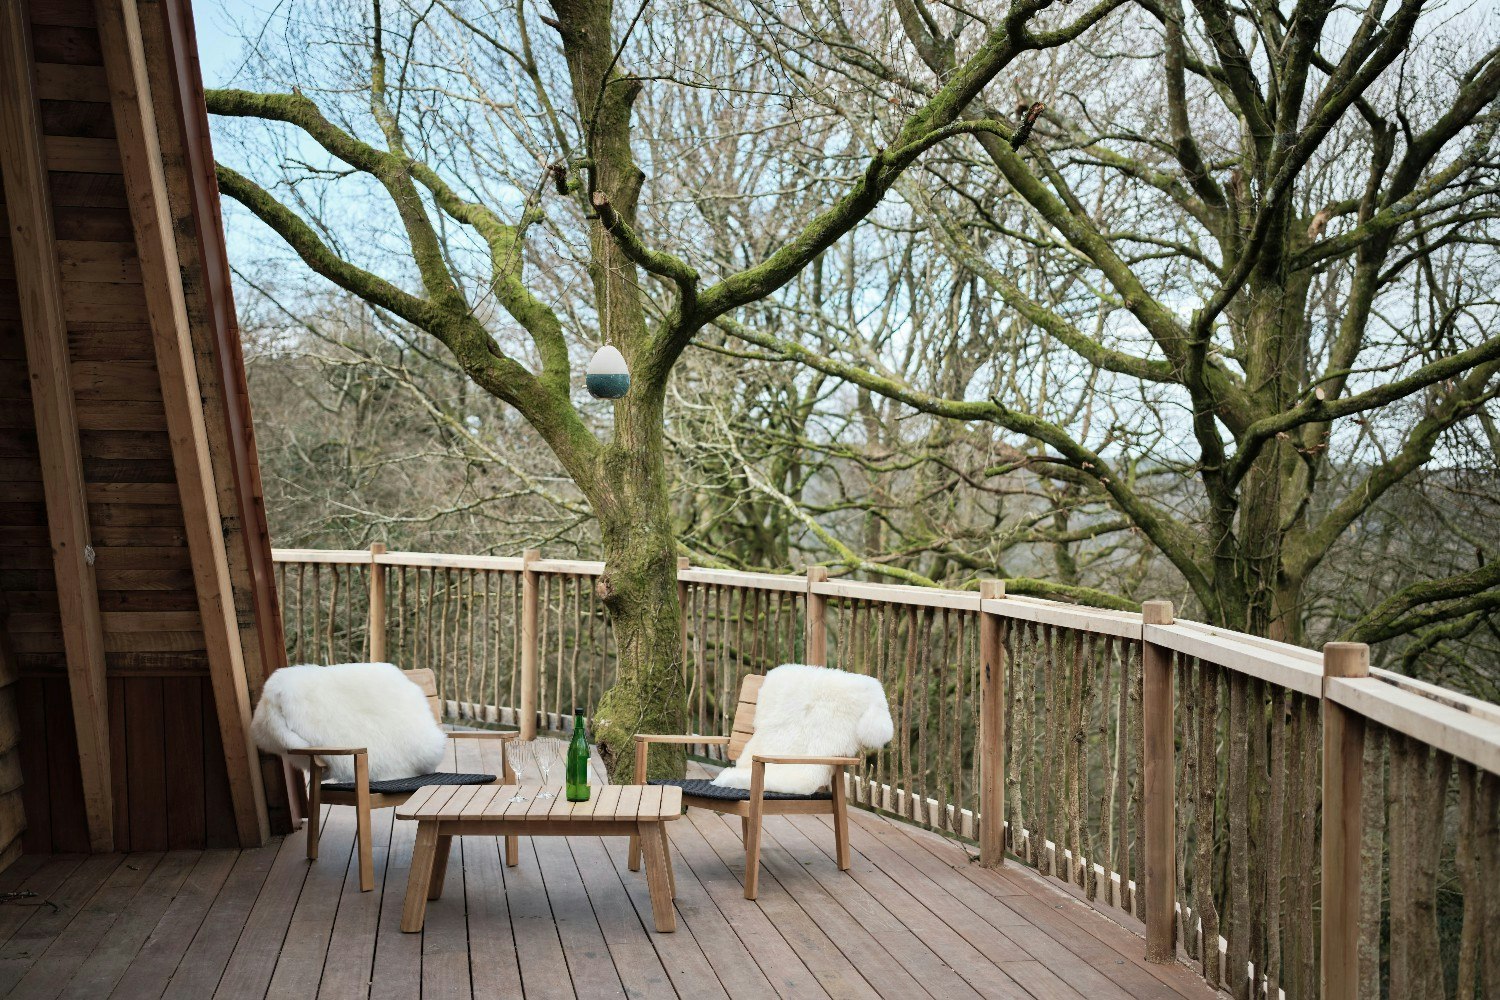 The deck at the treehouse